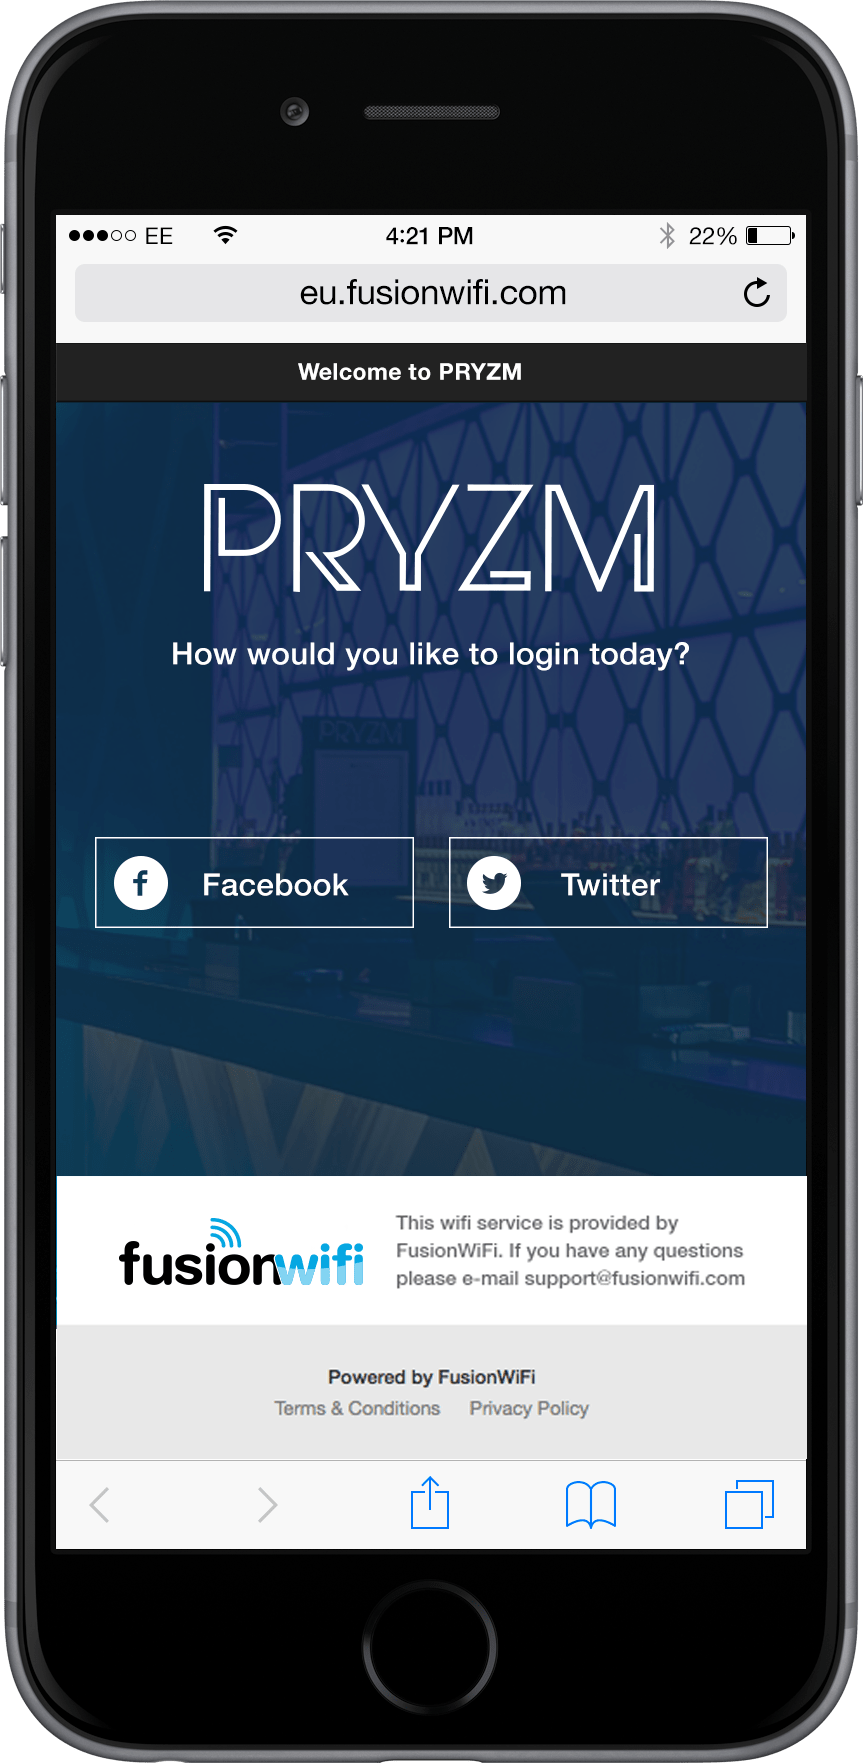 Social WiFi by Fusion WiFi - Suppliers of SocialWiFi ... - 863 x 1763 png 297kB